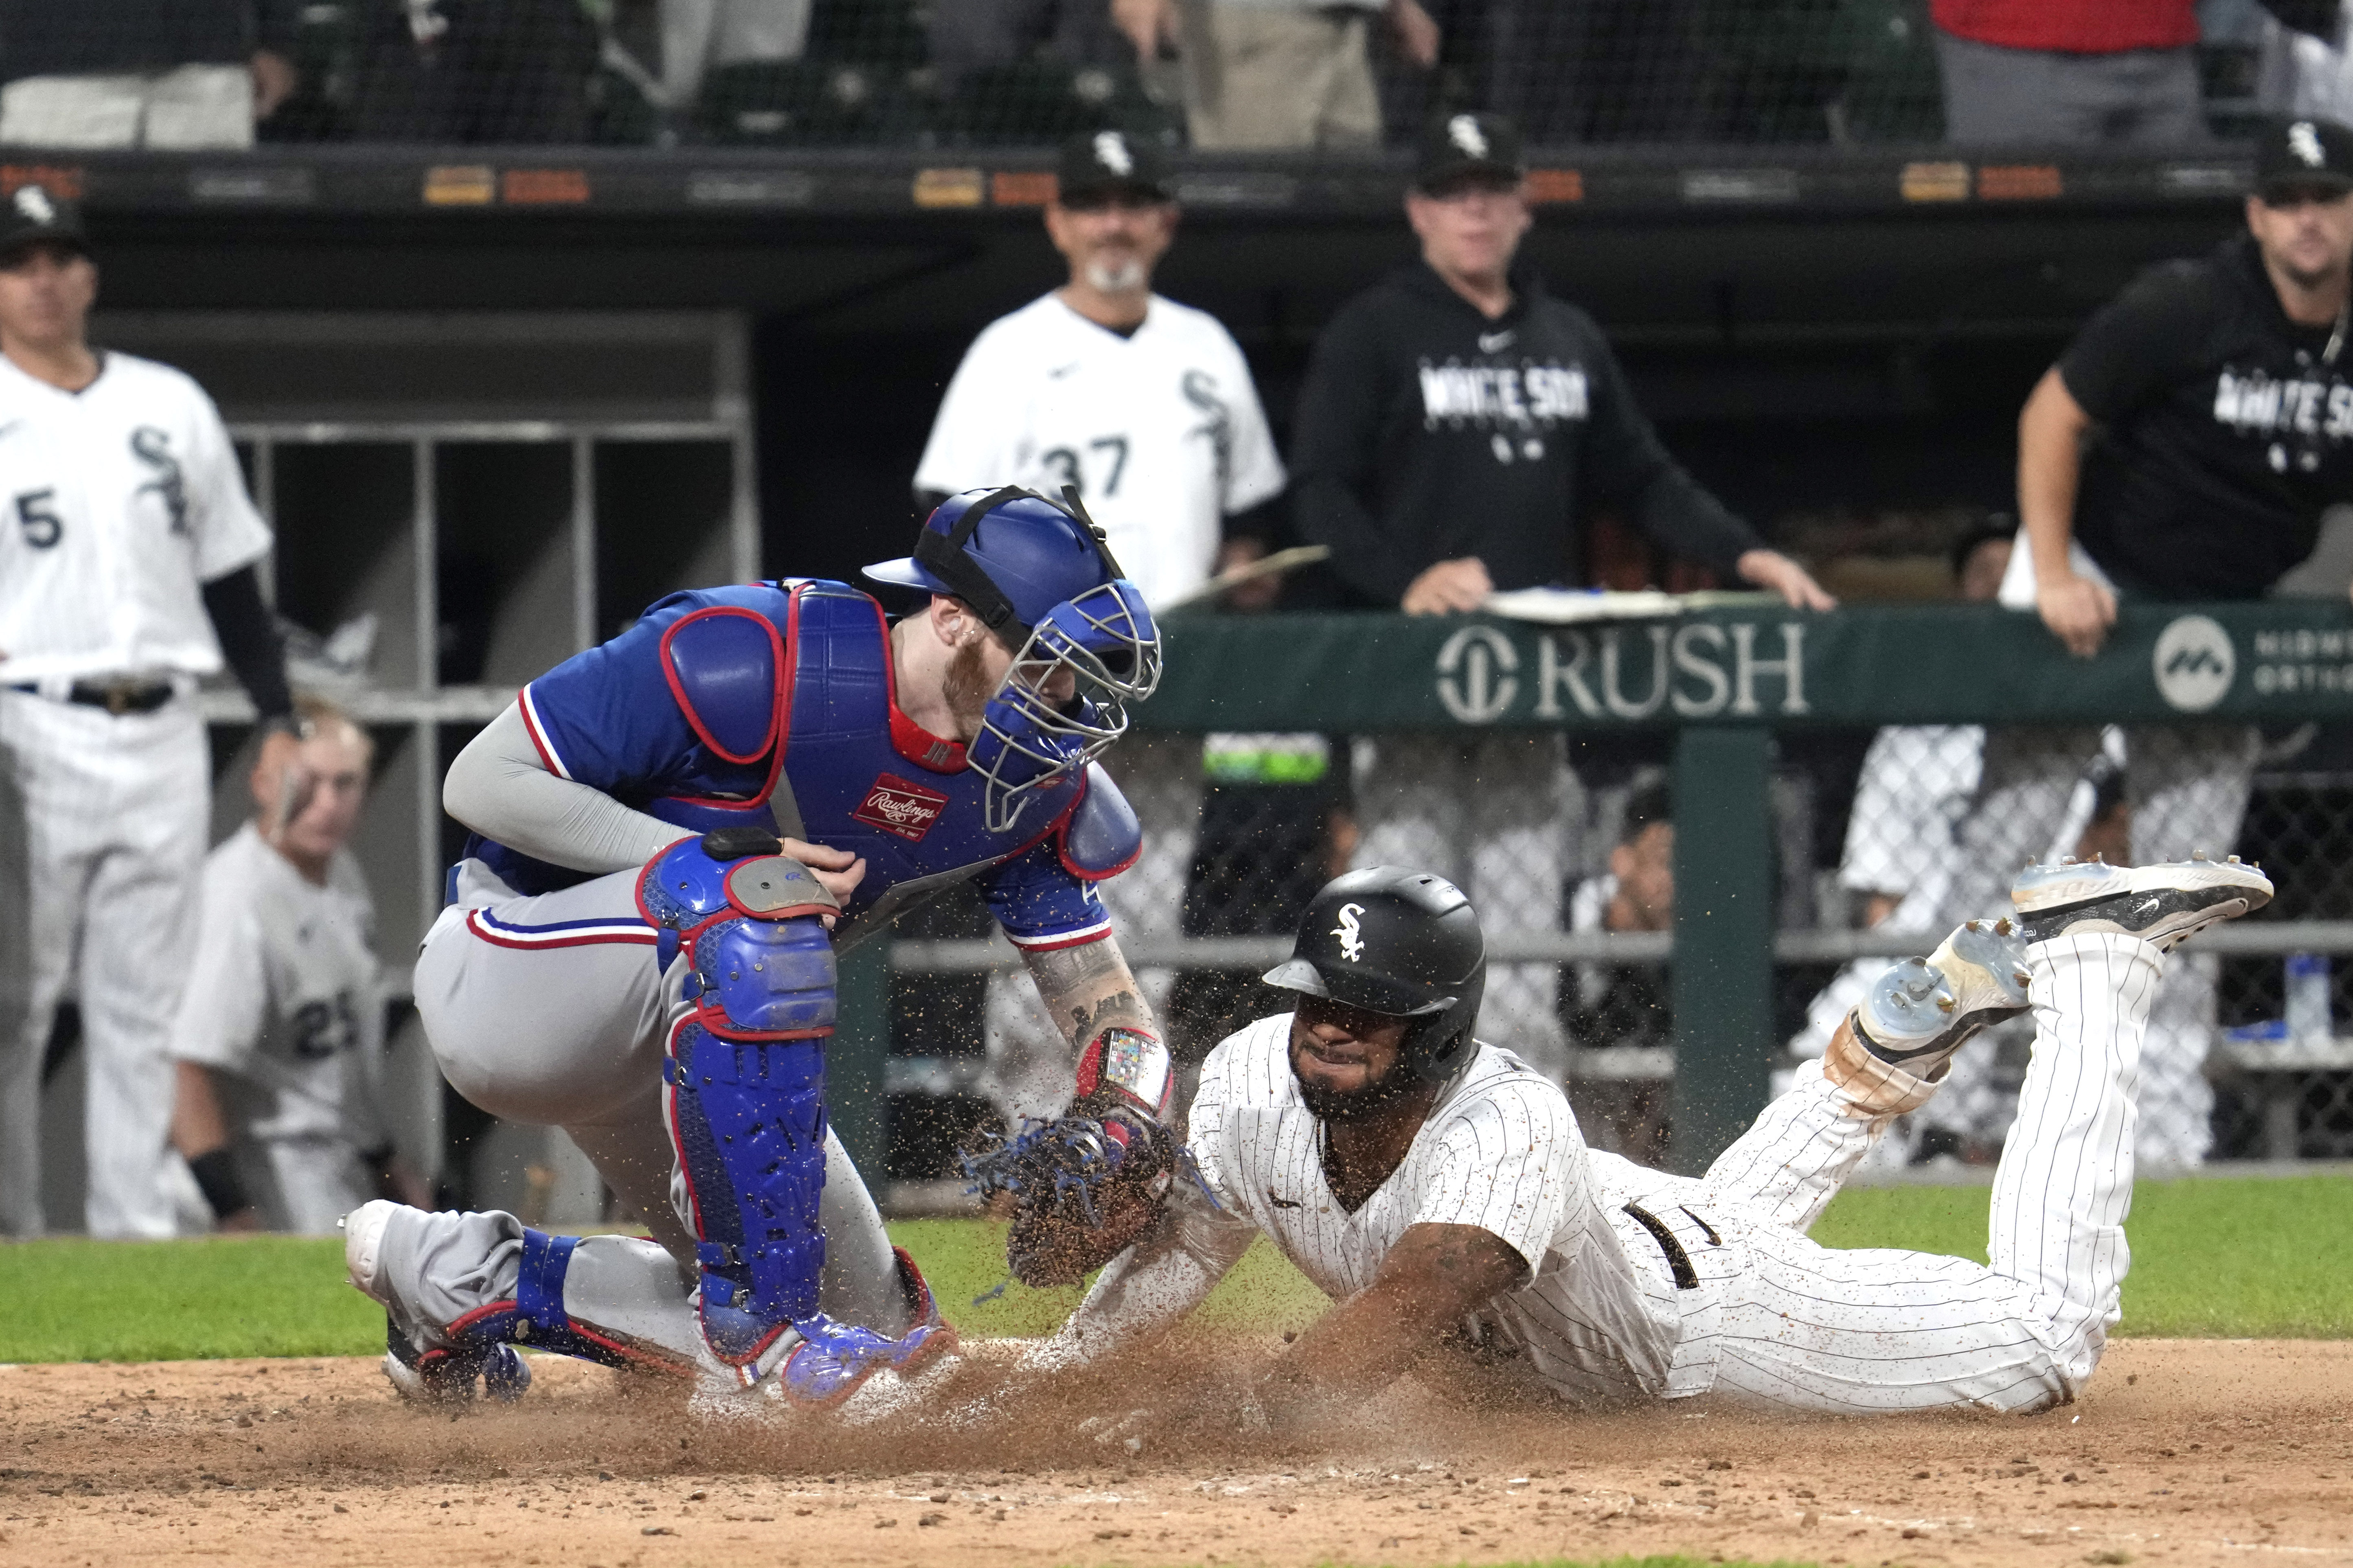 Chicago White Sox  Find Major League Baseball Games, Events